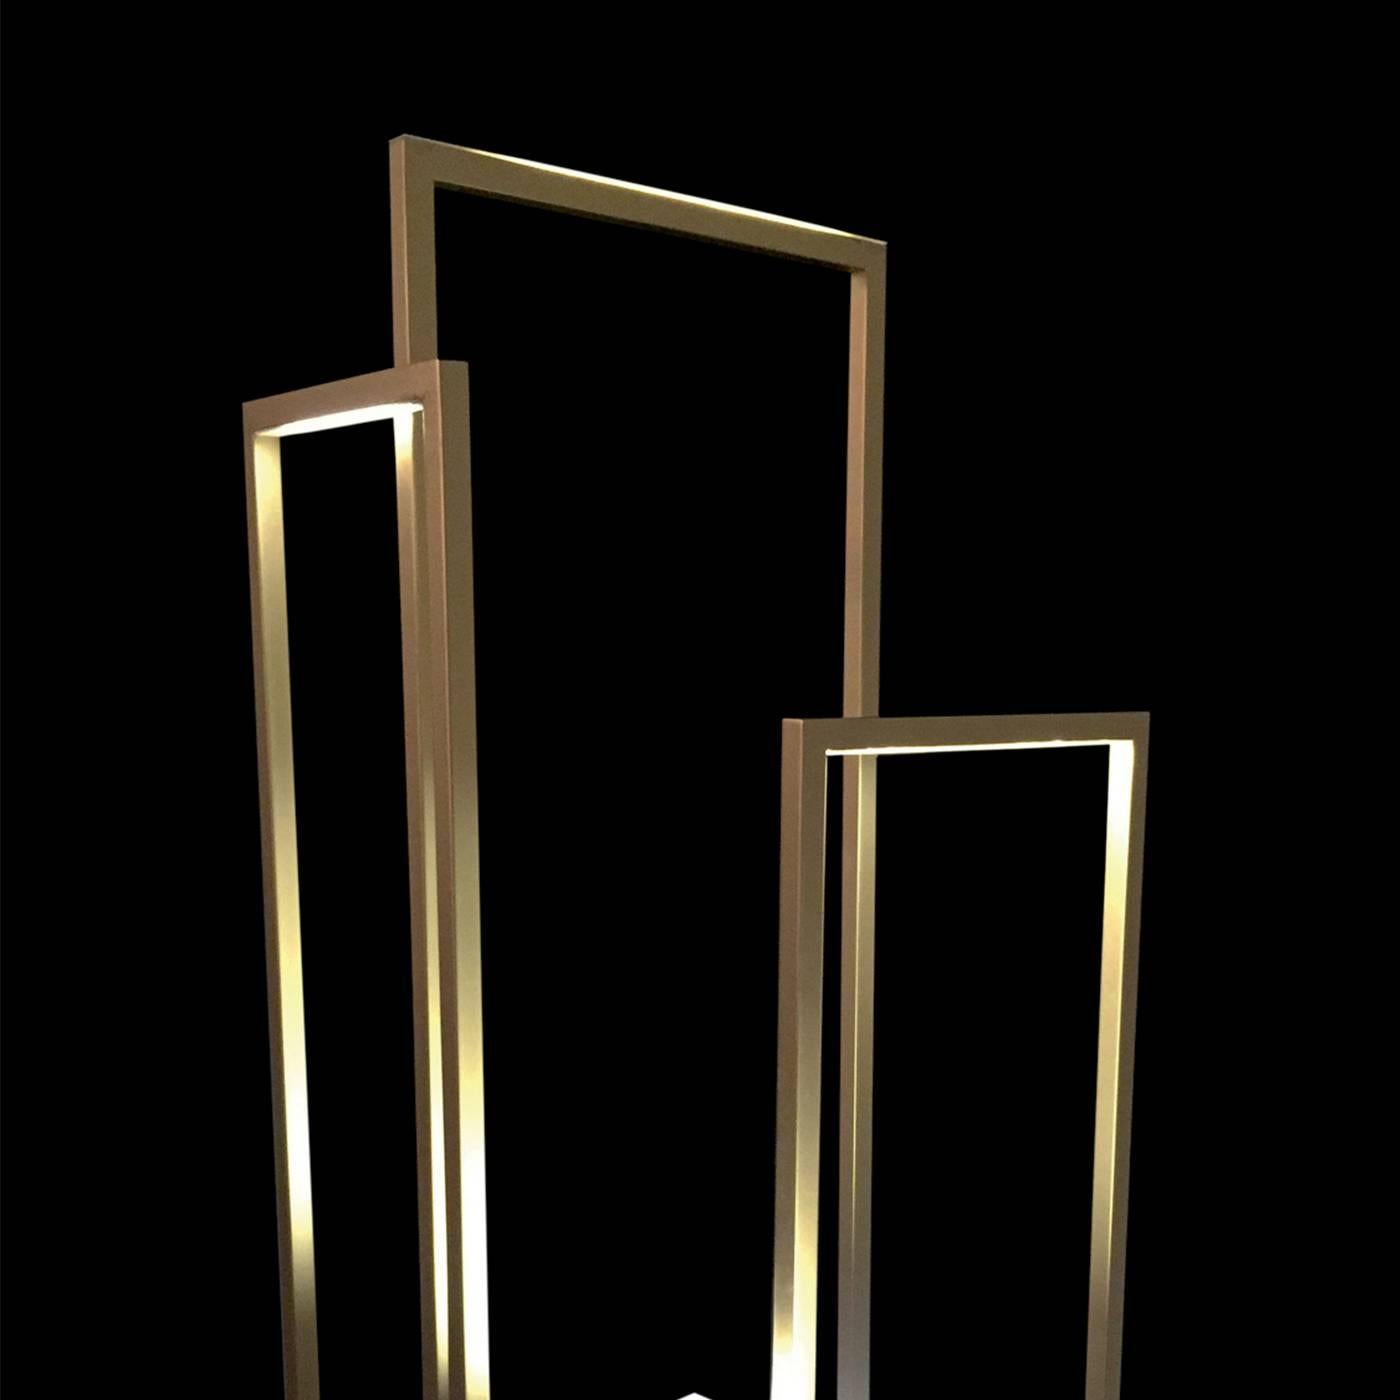 This modern floor lamp is made of several bars in brass with a square section that cross at different heights, creating a series of rectangles positioned in different directions. LED lights run around the inner perimeter of the bars creating, when